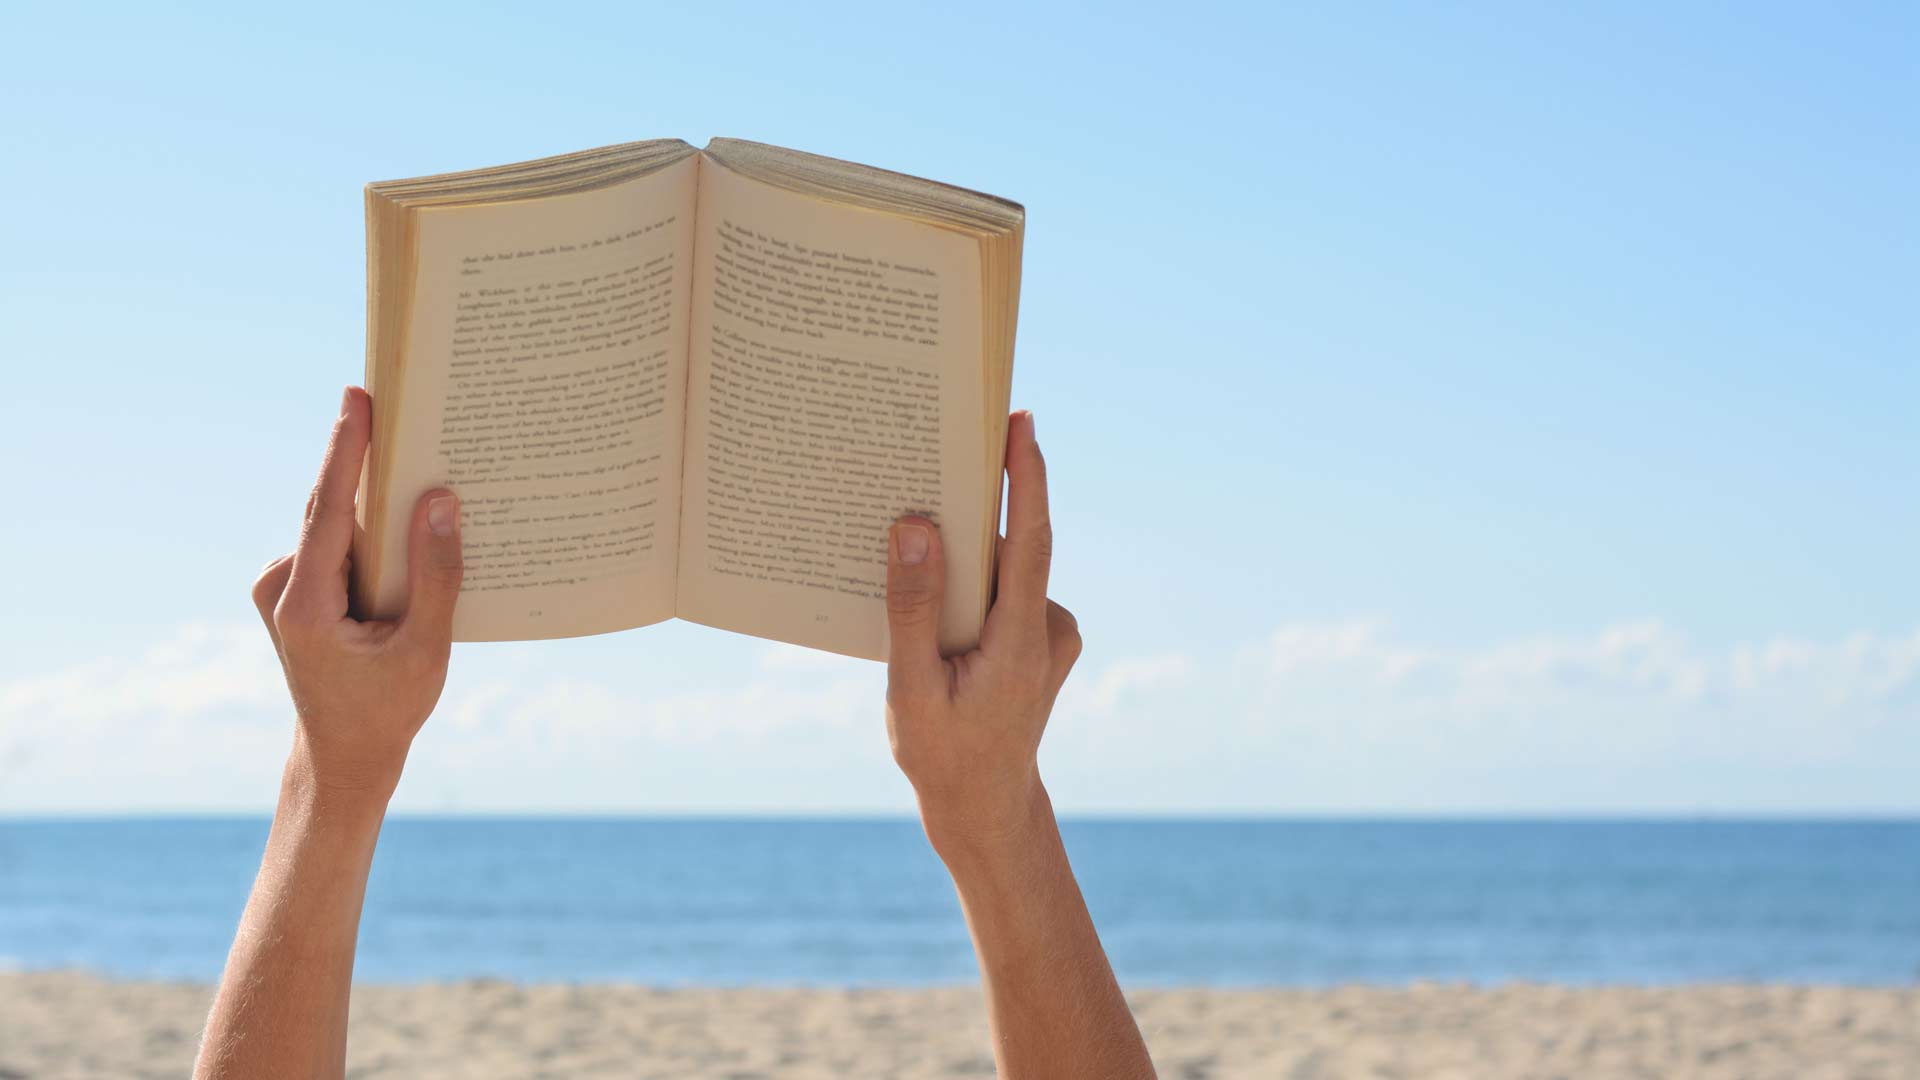 Book being read on the beach 